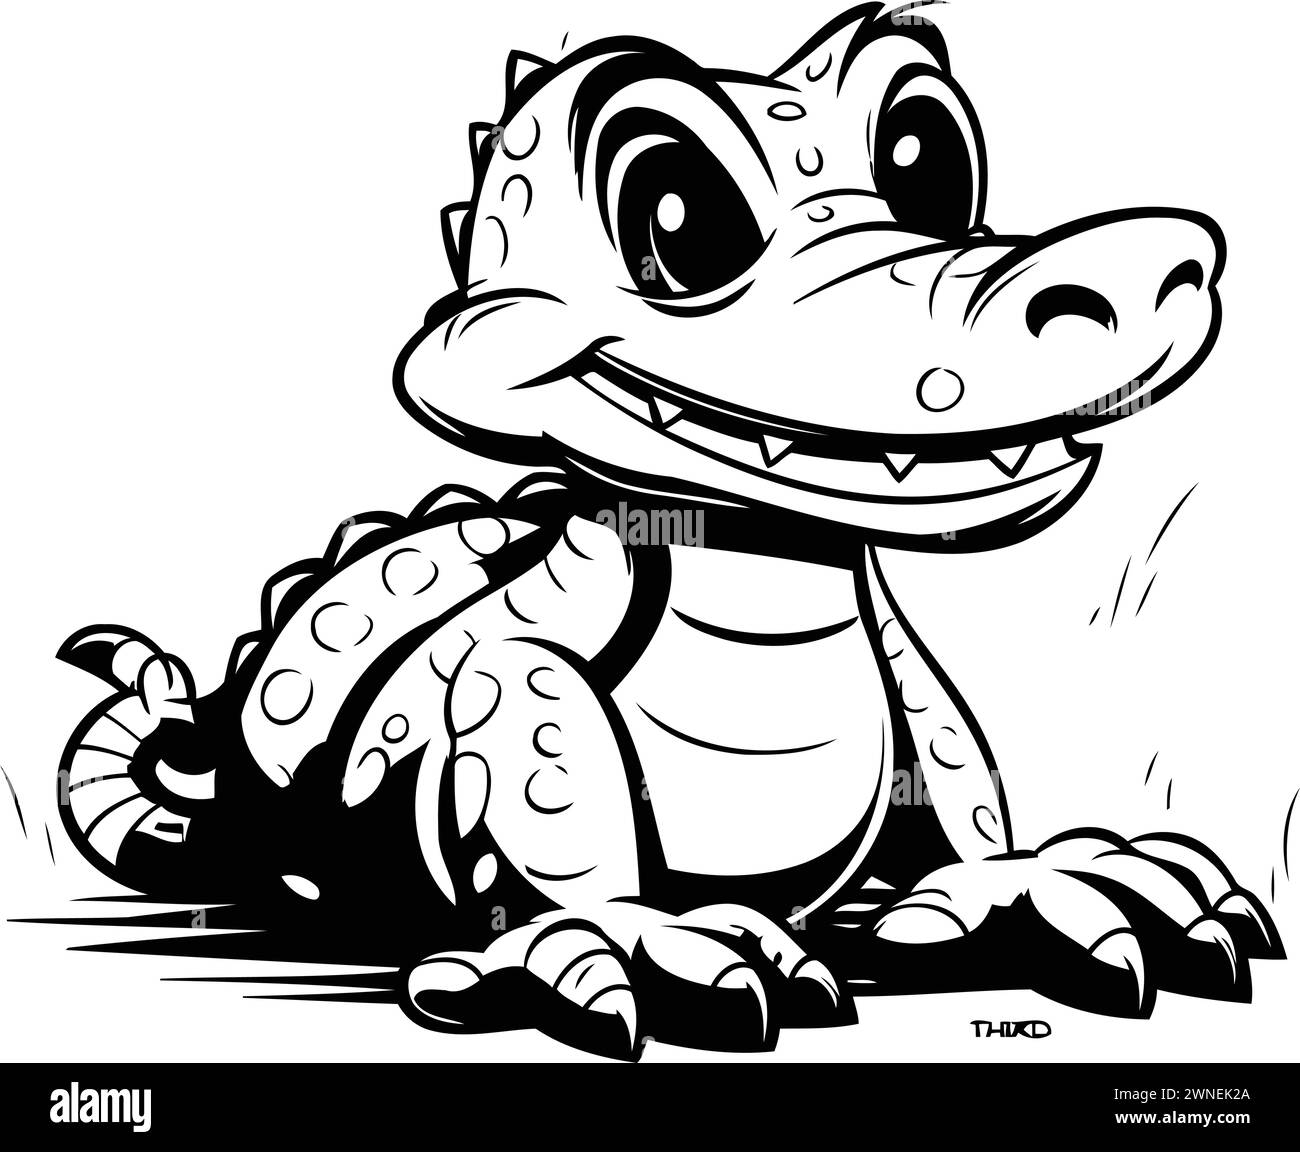 Cute cartoon crocodile. Black and white vector illustration for coloring book. Stock Vector